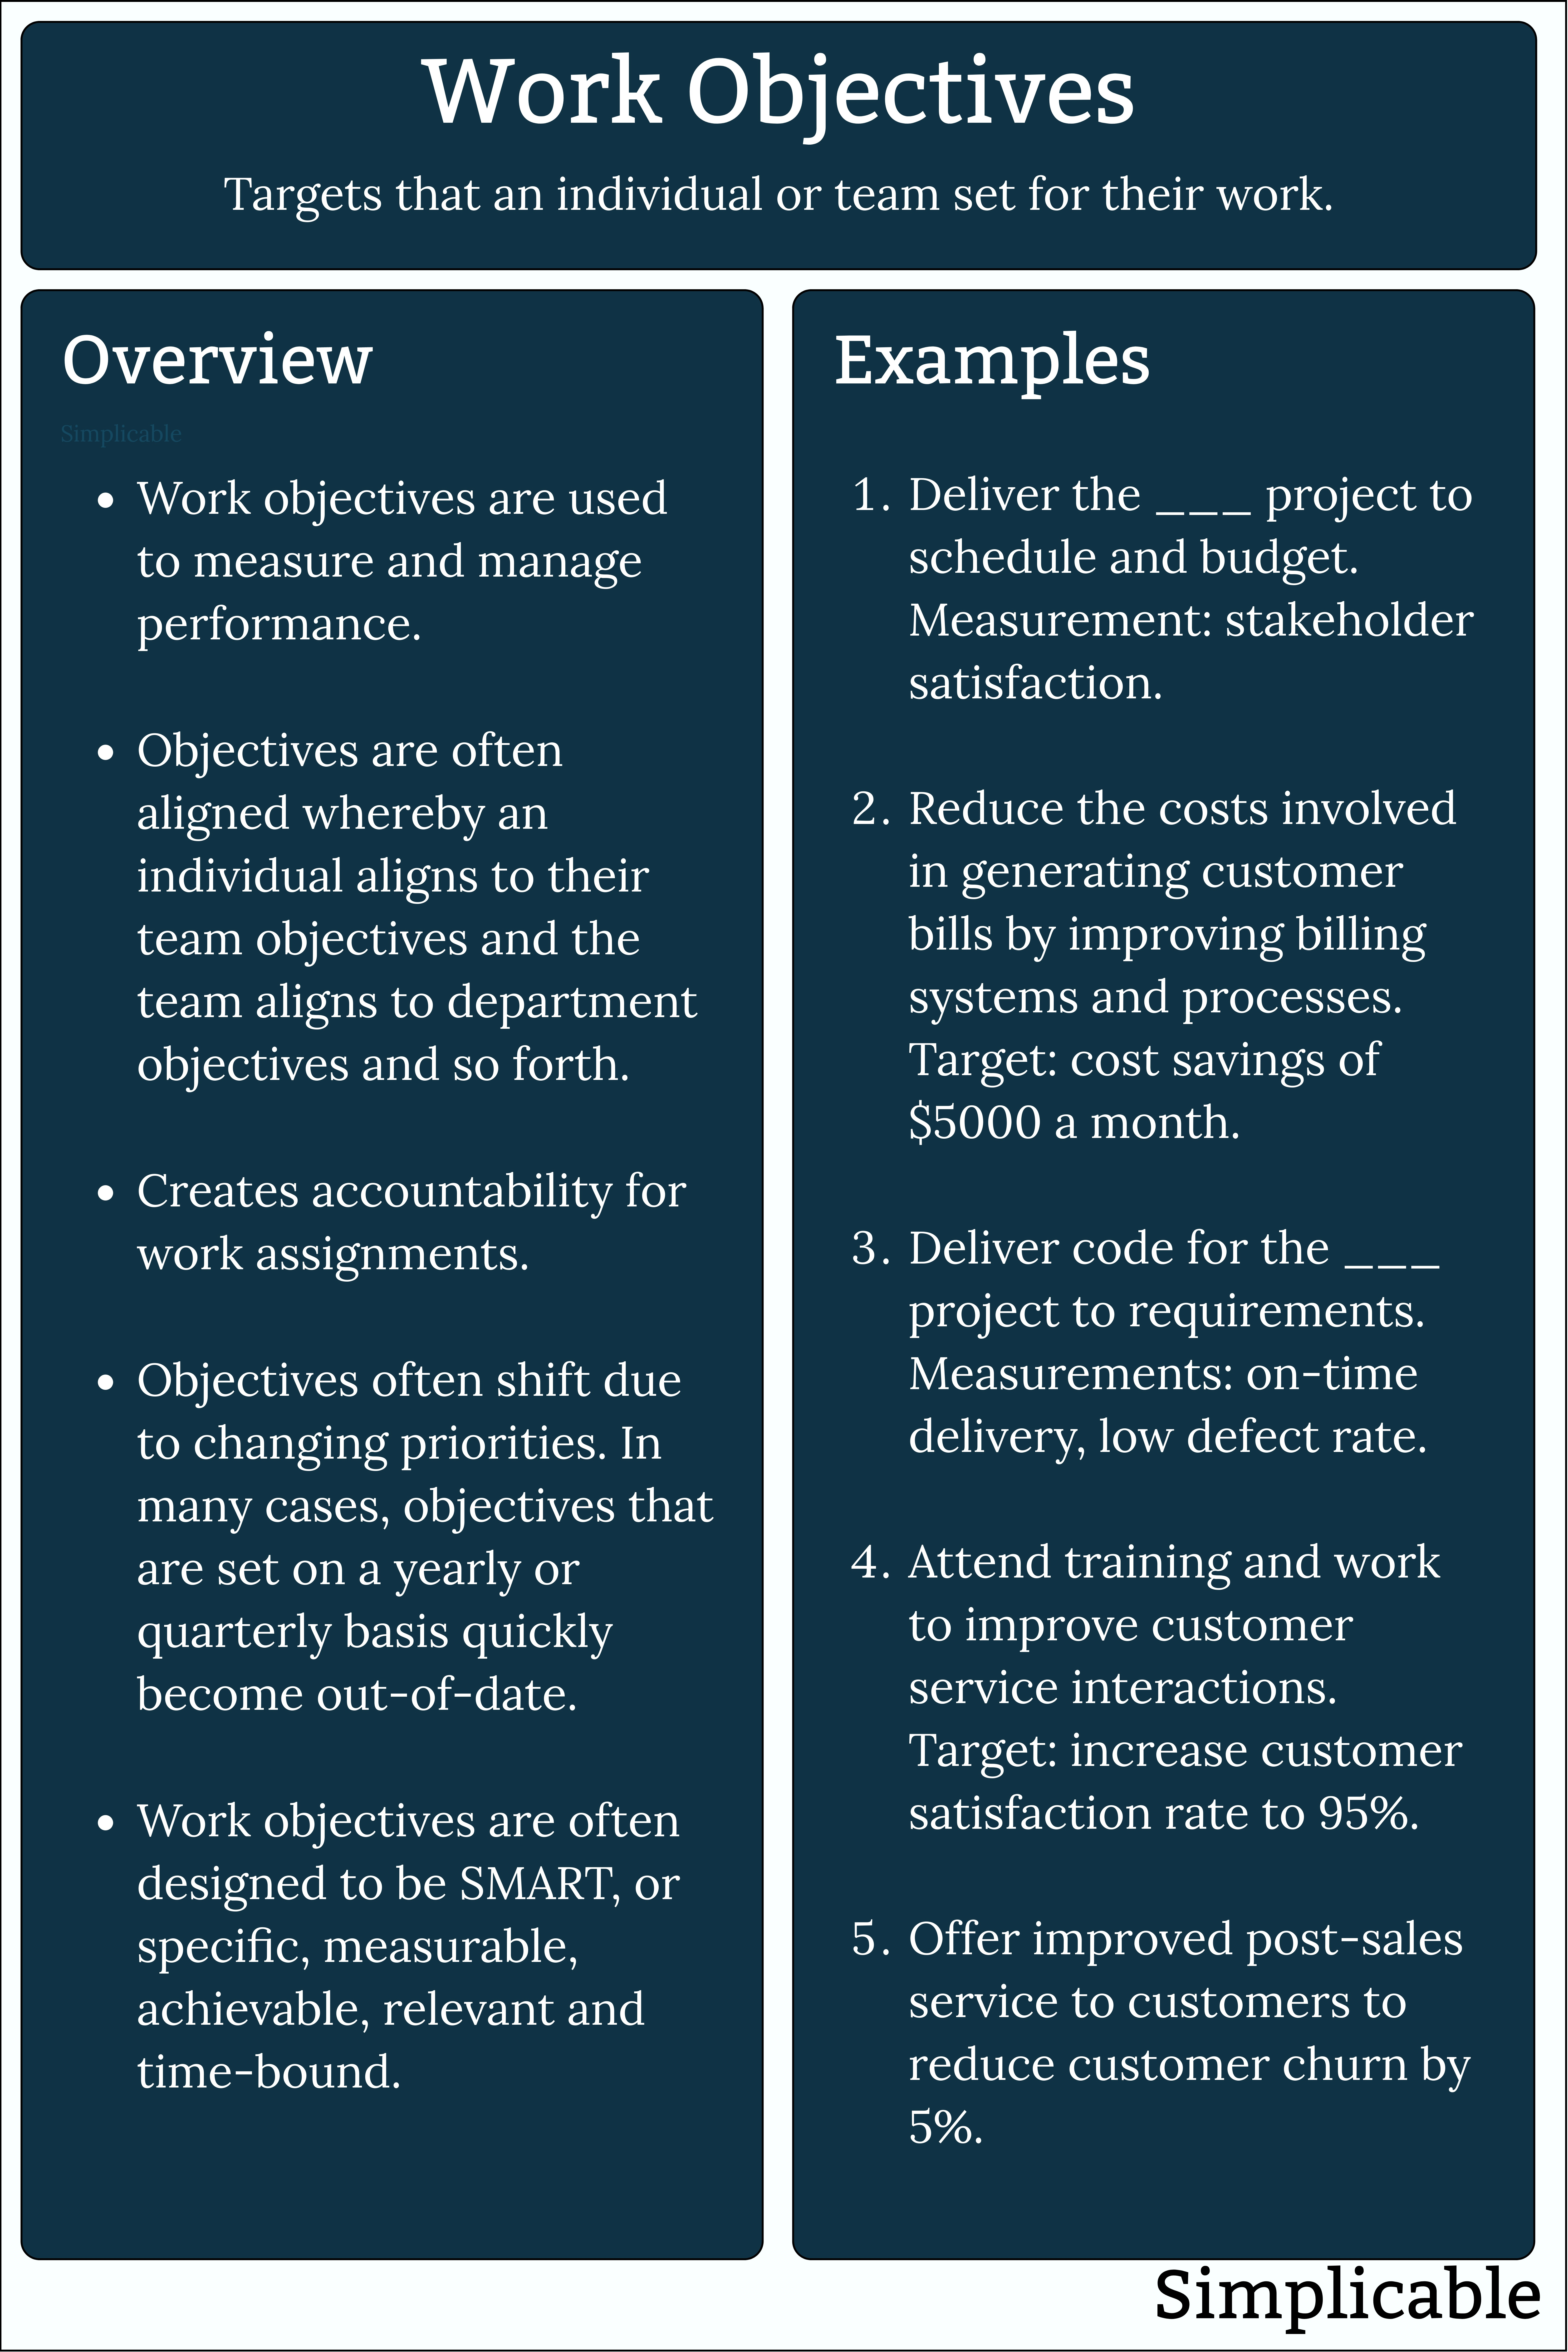 work objectives overview and examples